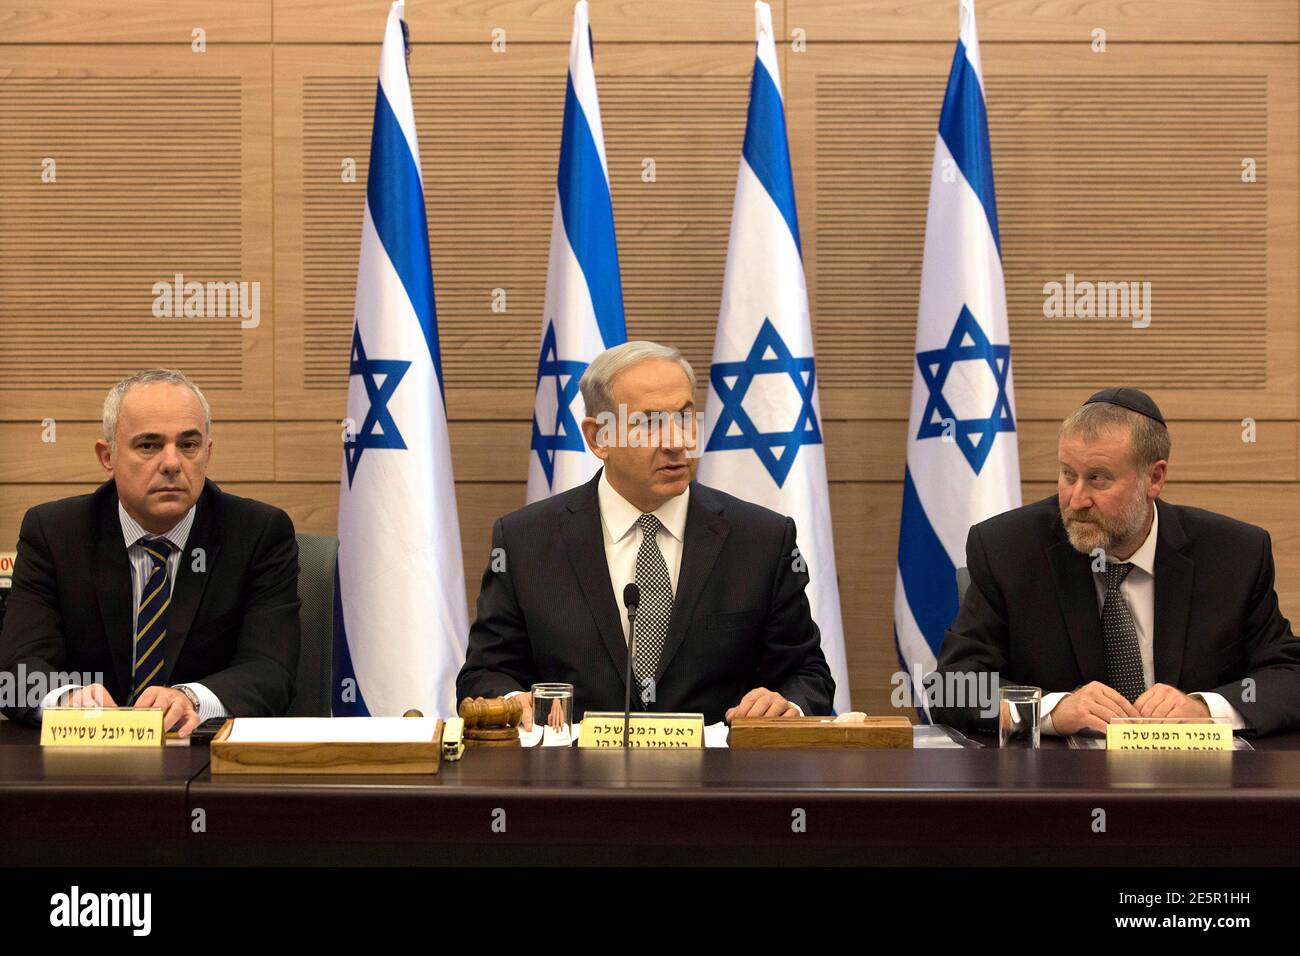 Israel's Prime Minister Benjamin Netanyahu (C) heads a cabinet meeting in Jerusalem July 24, 2014. Israel won a partial reprieve from the economic pain of its Gaza war on Thursday with the lifting of a U.S. ban on commercial flights to Tel Aviv, as fighting pushed the Palestinian death toll over 700. A truce remained elusive despite intensive mediation bids. Israel says it needs more time to eradicate cross-border tunnels used by Hamas for attacks, while the Palestinian Islamists demand the blockade on the Gaza Strip be lifted. REUTERS/Siegfried Modola (JERUSALEM - Tags: POLITICS CONFLICT) Stock Photo